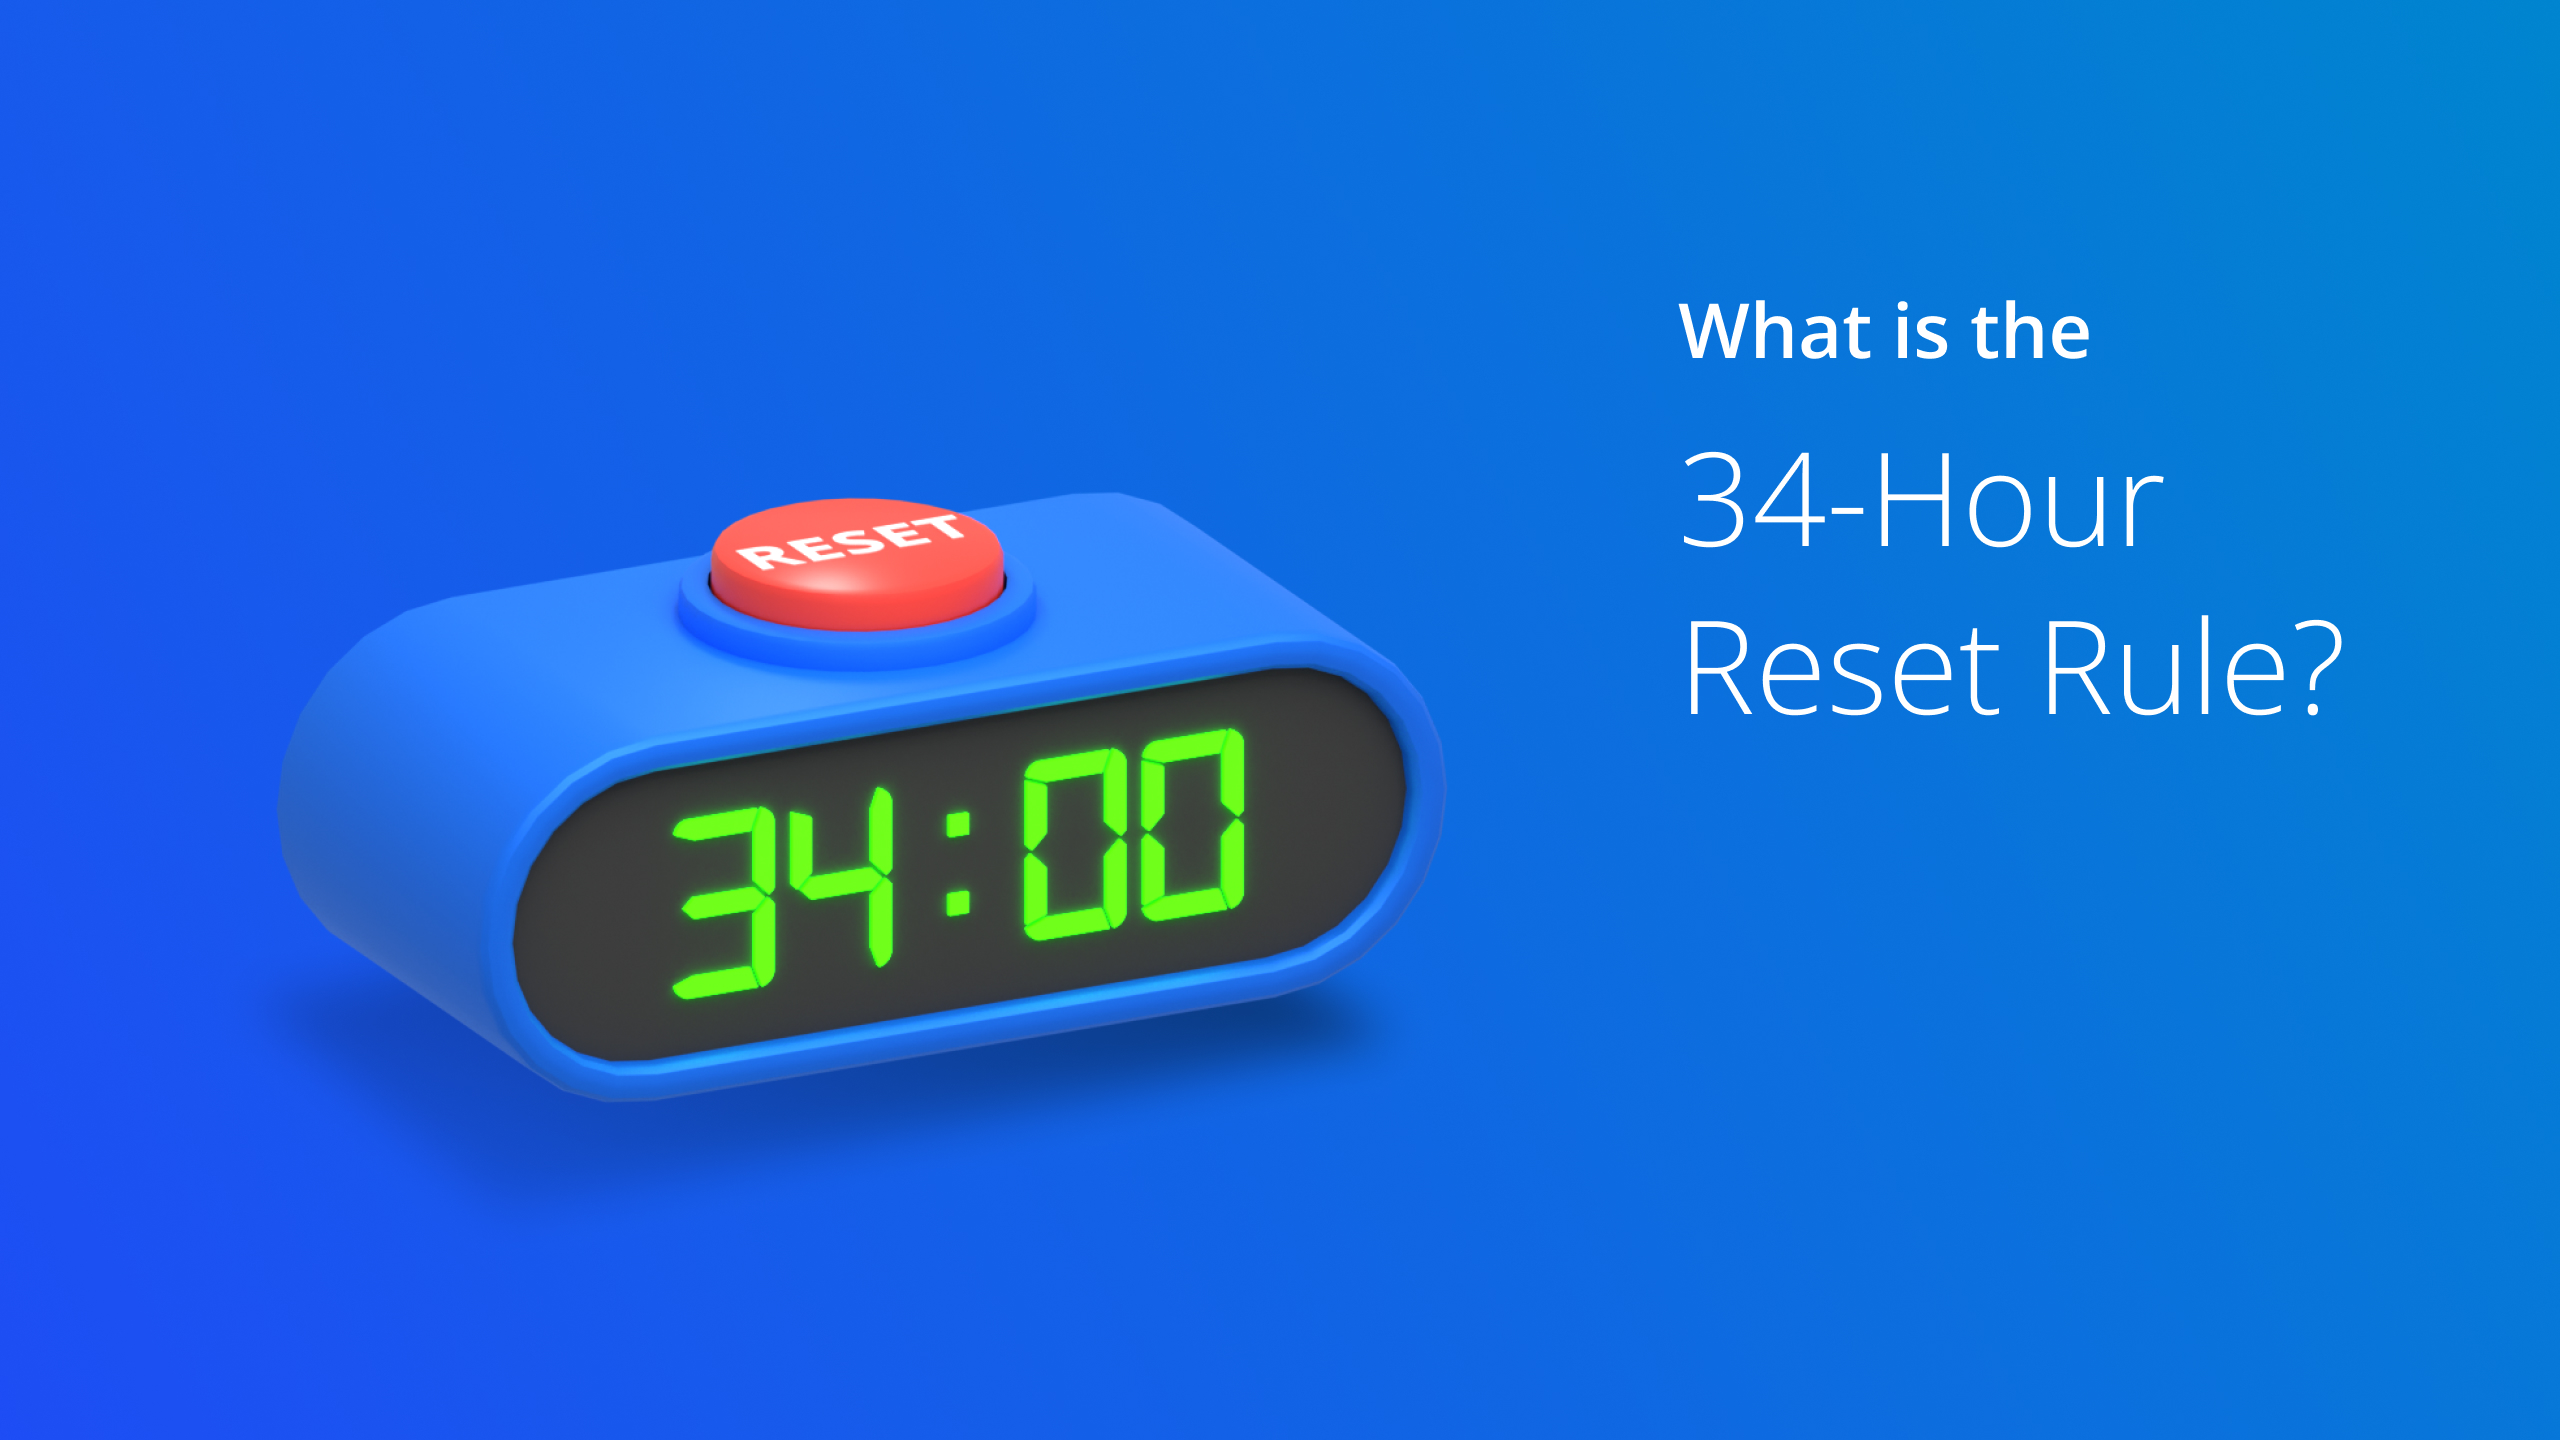 How long does a 34-hour restart really take?